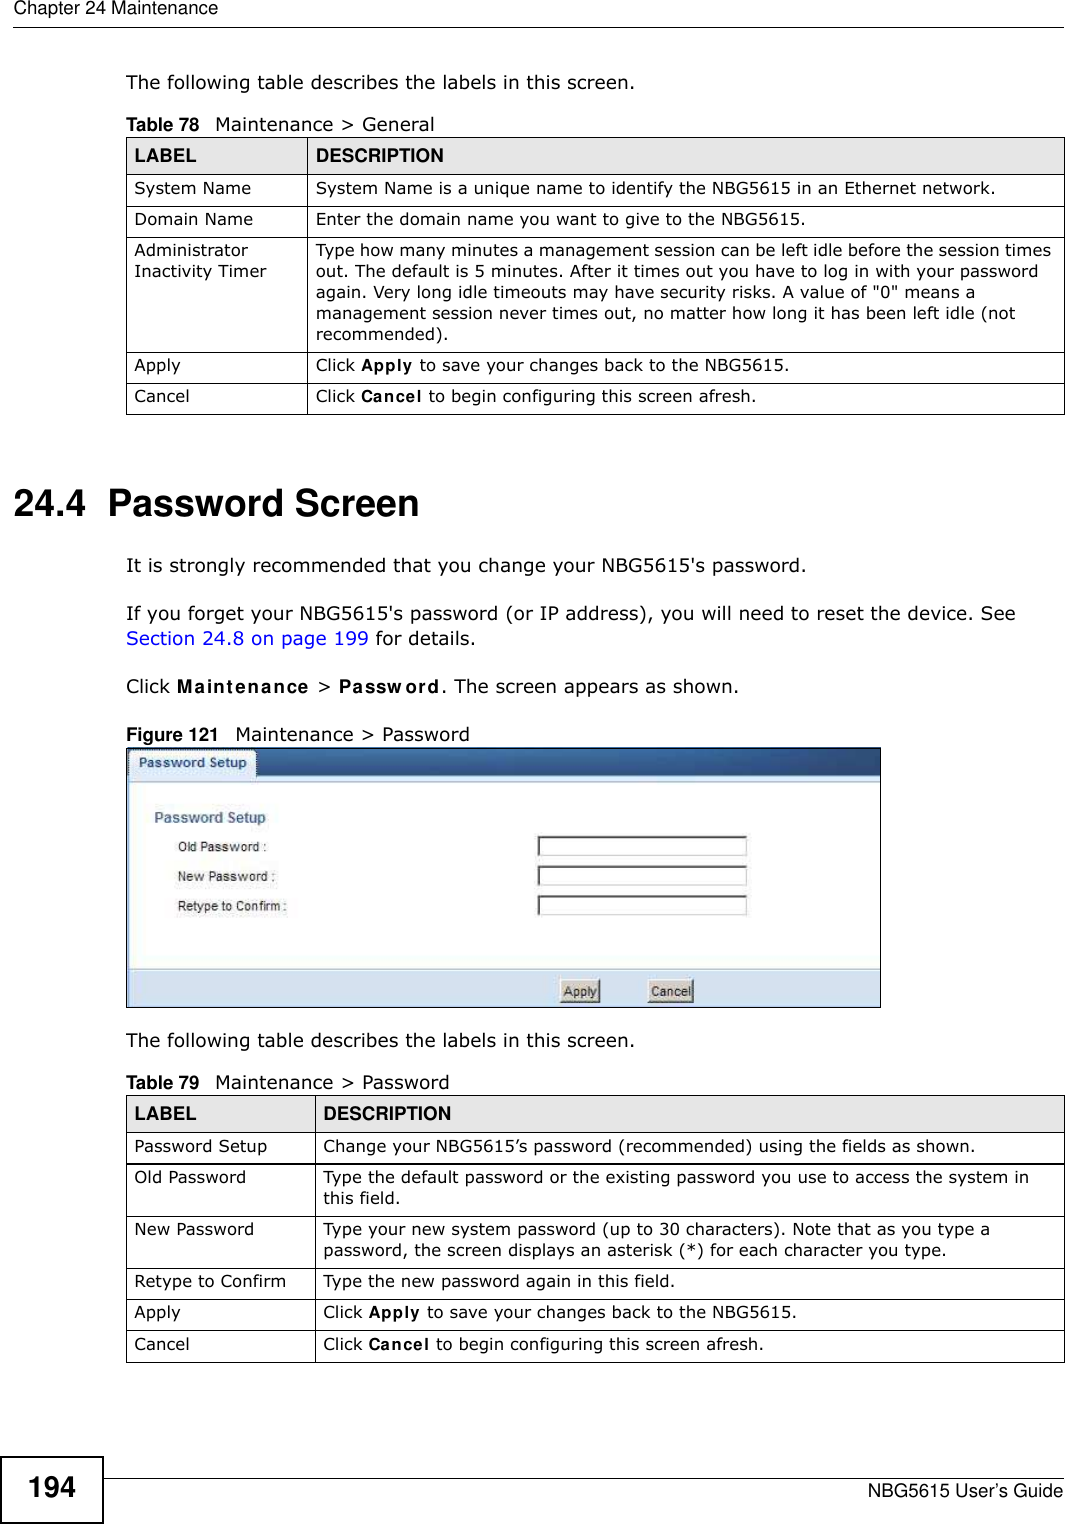 Chapter 24 MaintenanceNBG5615 User’s Guide194The following table describes the labels in this screen.24.4  Password ScreenIt is strongly recommended that you change your NBG5615&apos;s password. If you forget your NBG5615&apos;s password (or IP address), you will need to reset the device. See Section 24.8 on page 199 for details.Click Maintenance &gt; Passw ord. The screen appears as shown.Figure 121   Maintenance &gt; Password The following table describes the labels in this screen.Table 78   Maintenance &gt; GeneralLABEL DESCRIPTIONSystem Name System Name is a unique name to identify the NBG5615 in an Ethernet network.Domain Name Enter the domain name you want to give to the NBG5615.Administrator Inactivity TimerType how many minutes a management session can be left idle before the session times out. The default is 5 minutes. After it times out you have to log in with your password again. Very long idle timeouts may have security risks. A value of &quot;0&quot; means a management session never times out, no matter how long it has been left idle (not recommended).Apply Click Apply to save your changes back to the NBG5615.Cancel Click Cancel to begin configuring this screen afresh.Table 79   Maintenance &gt; PasswordLABEL DESCRIPTIONPassword Setup Change your NBG5615’s password (recommended) using the fields as shown.Old Password Type the default password or the existing password you use to access the system in this field.New Password Type your new system password (up to 30 characters). Note that as you type a password, the screen displays an asterisk (*) for each character you type.Retype to Confirm Type the new password again in this field.Apply Click Apply to save your changes back to the NBG5615.Cancel Click Cancel to begin configuring this screen afresh.